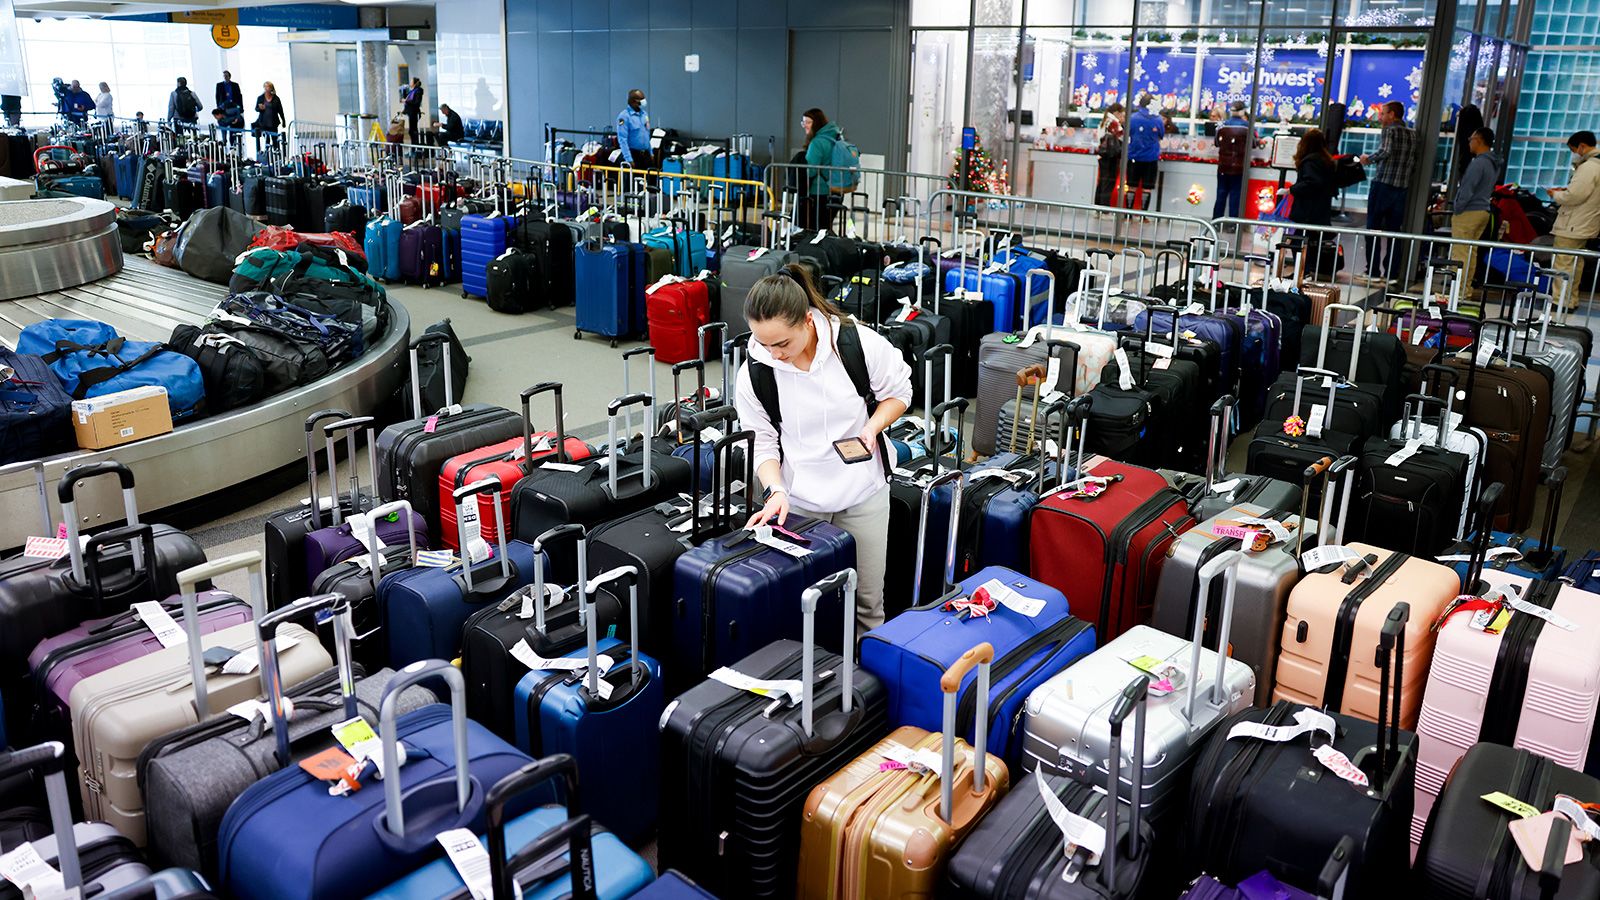 Airport worker shares simple hack to prevent losing your baggage